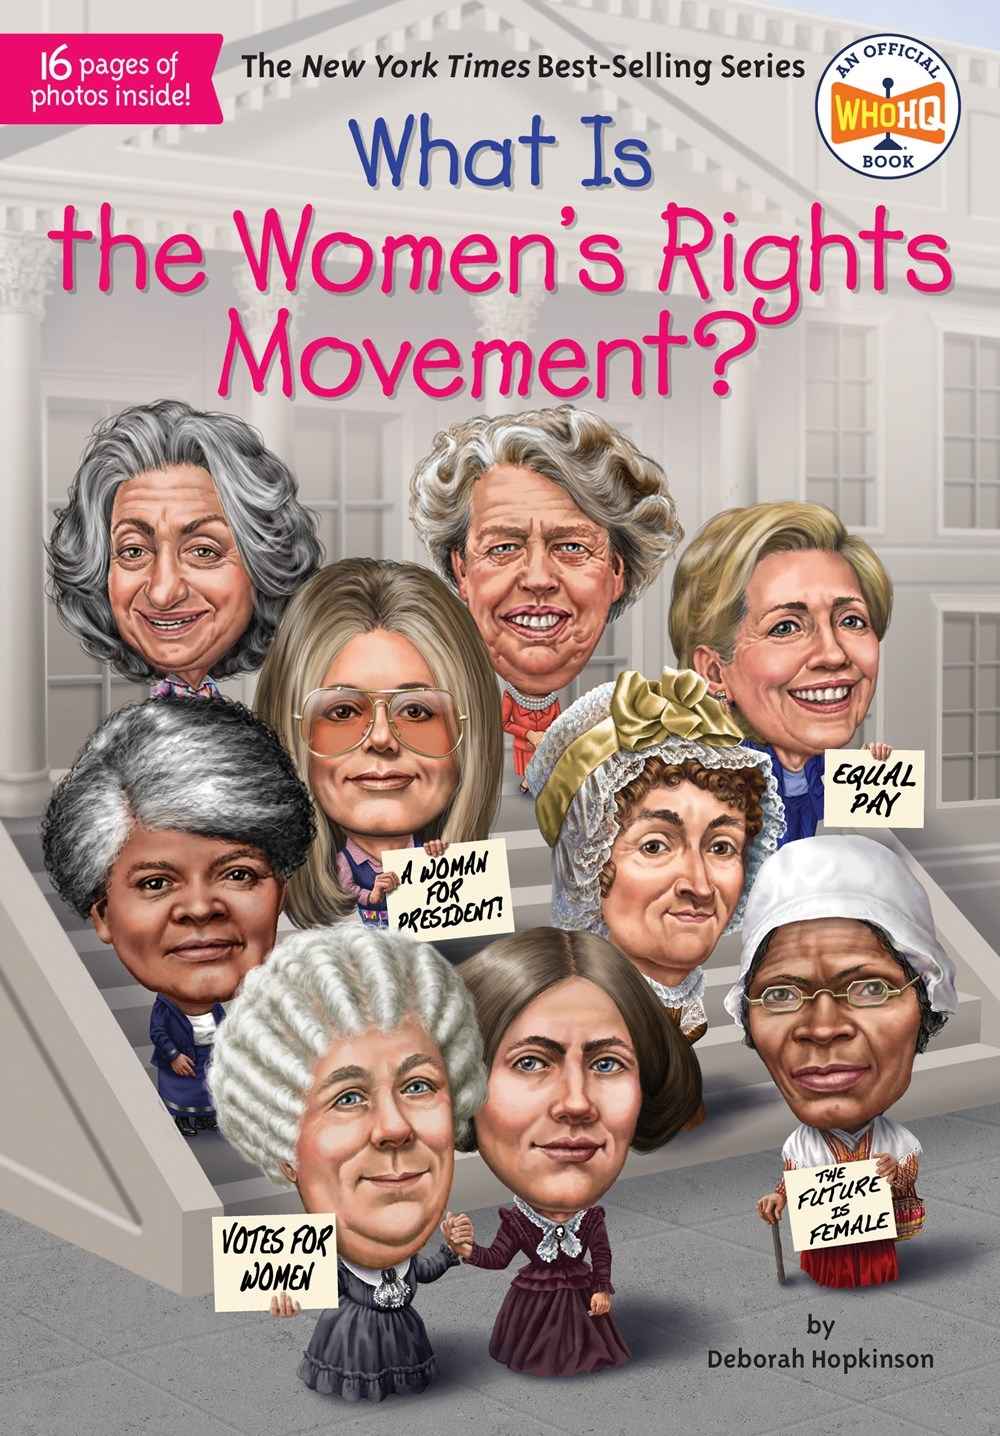 What is the Women's Right Movement?